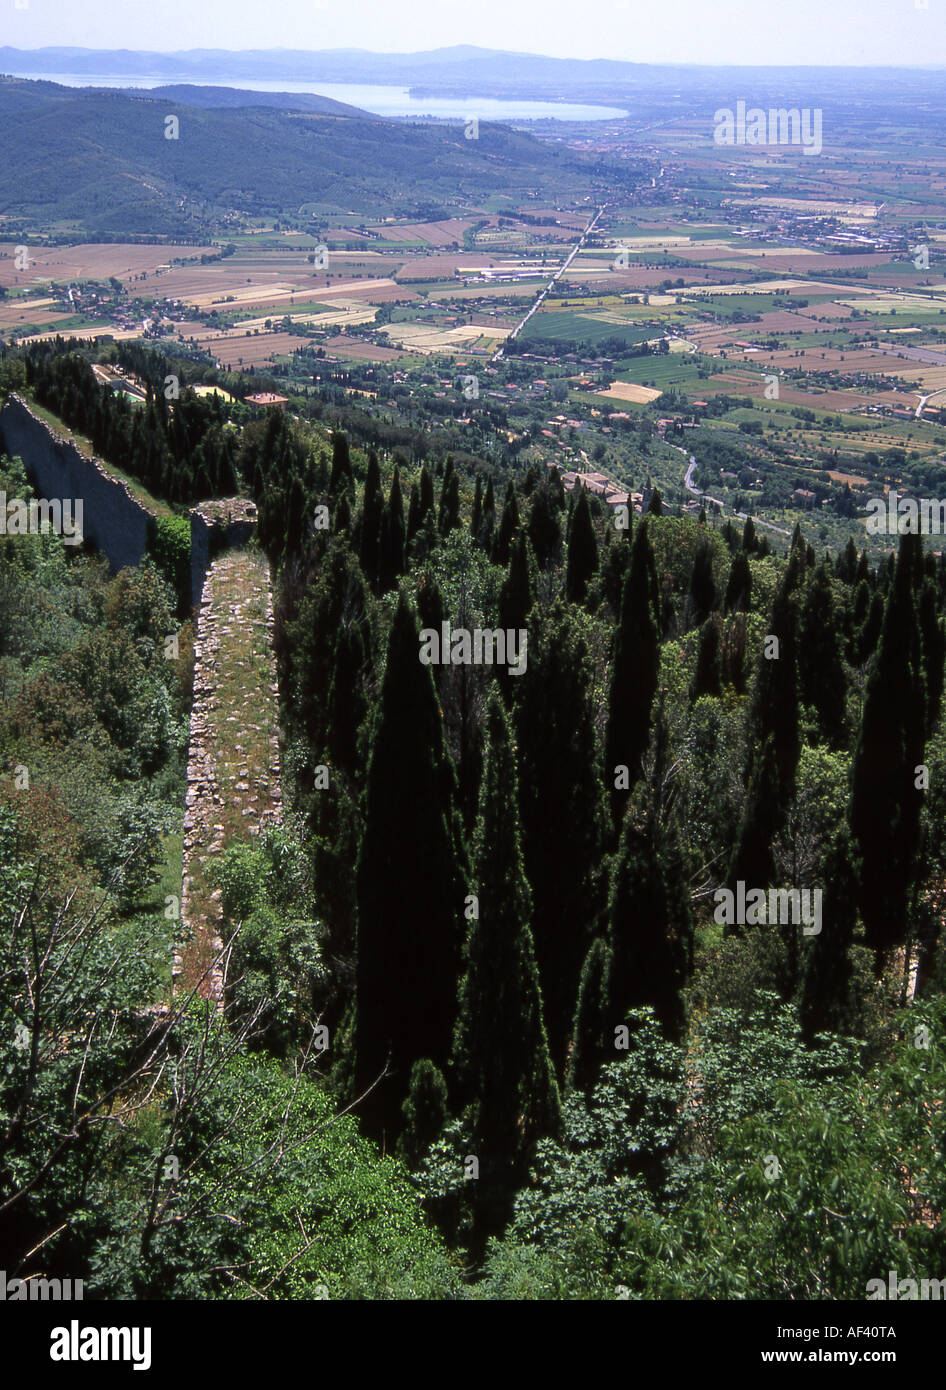 Looking south from the Fortezza Medicea, Cortona, Tuscany, with Lake Trasimene in the distance Stock Photo